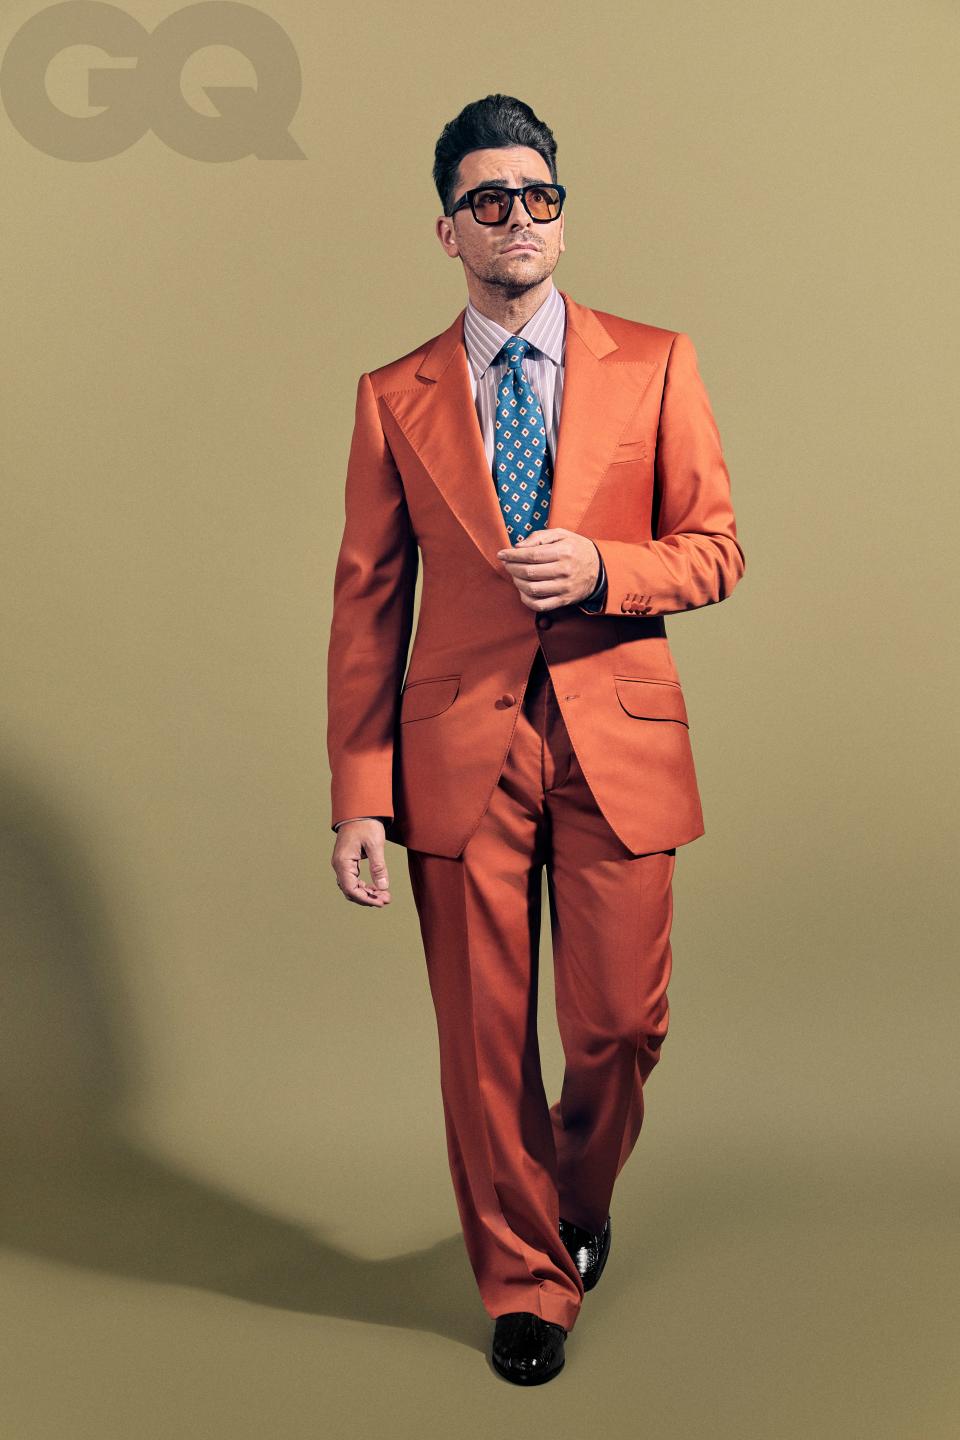 <cite class="credit">Suit, $1,950, by David Hart / Shirt, $750, by Brioni / Tie, $225, by Isaia / Shoes, $90, by Stacy Adams / Sunglasses, his own, by Gucci </cite>